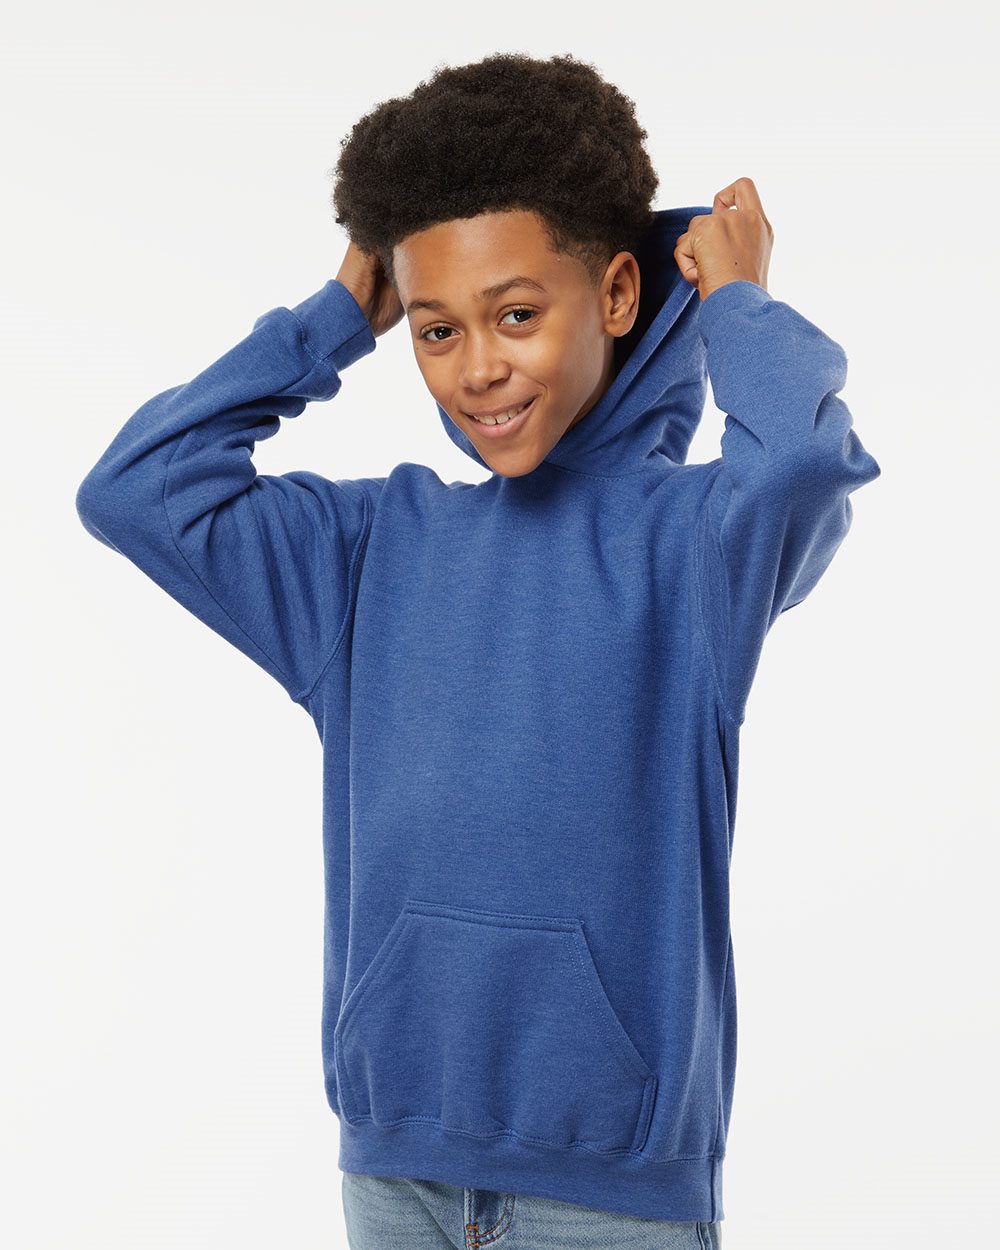 M&O 3322 - Youth Fleece Pullover Hoodie